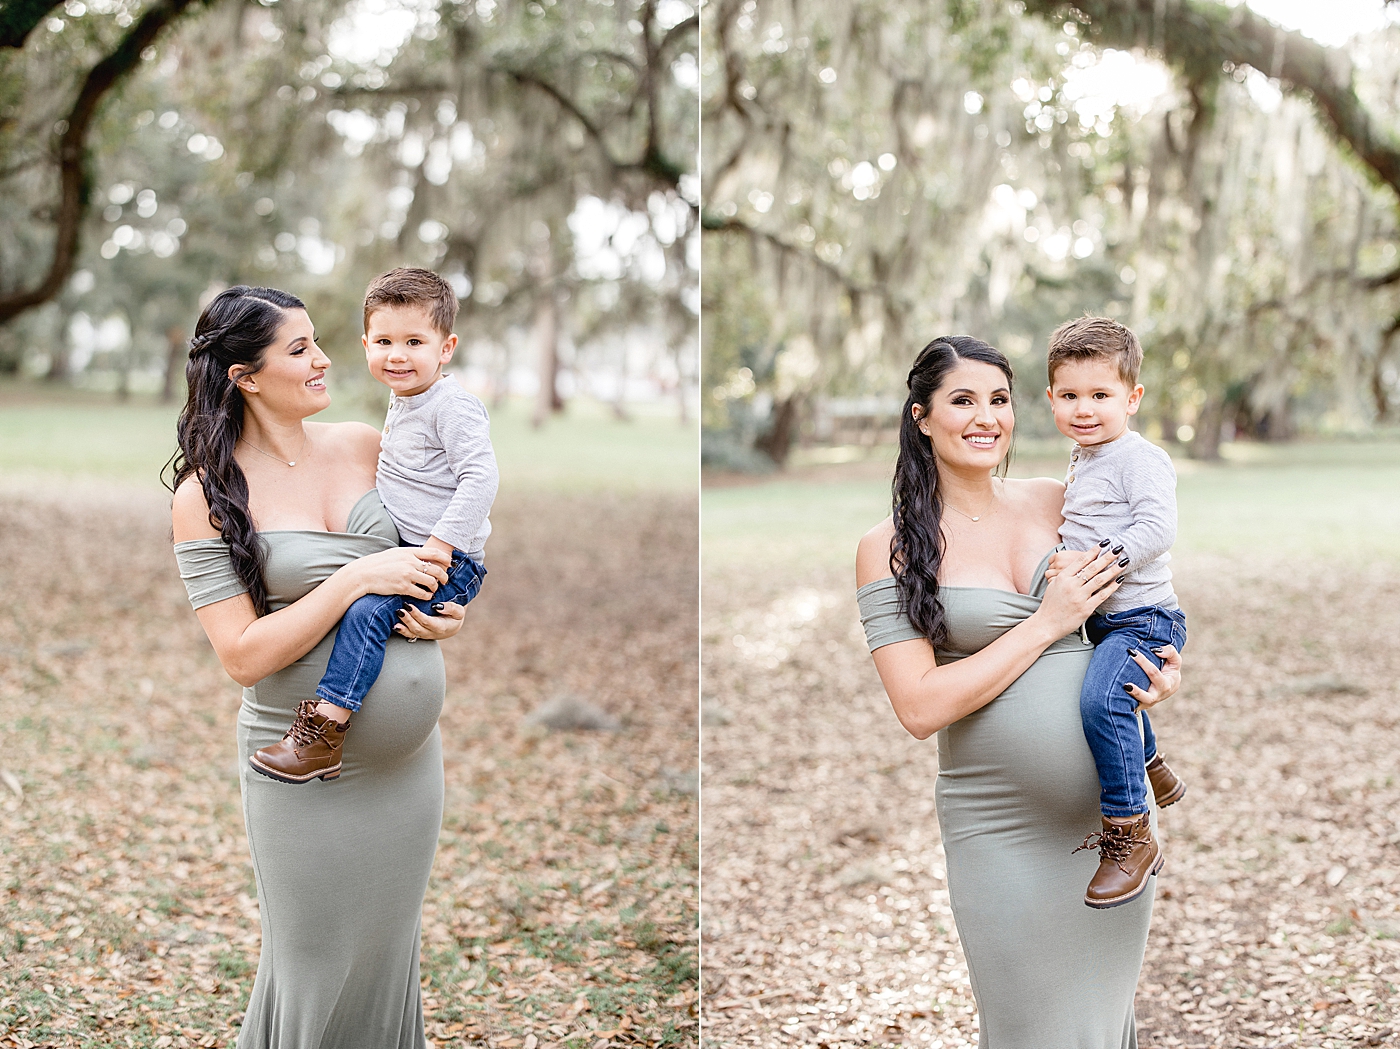 Pregnant mama holding her first son. Photo by Brittany Elise Photography.